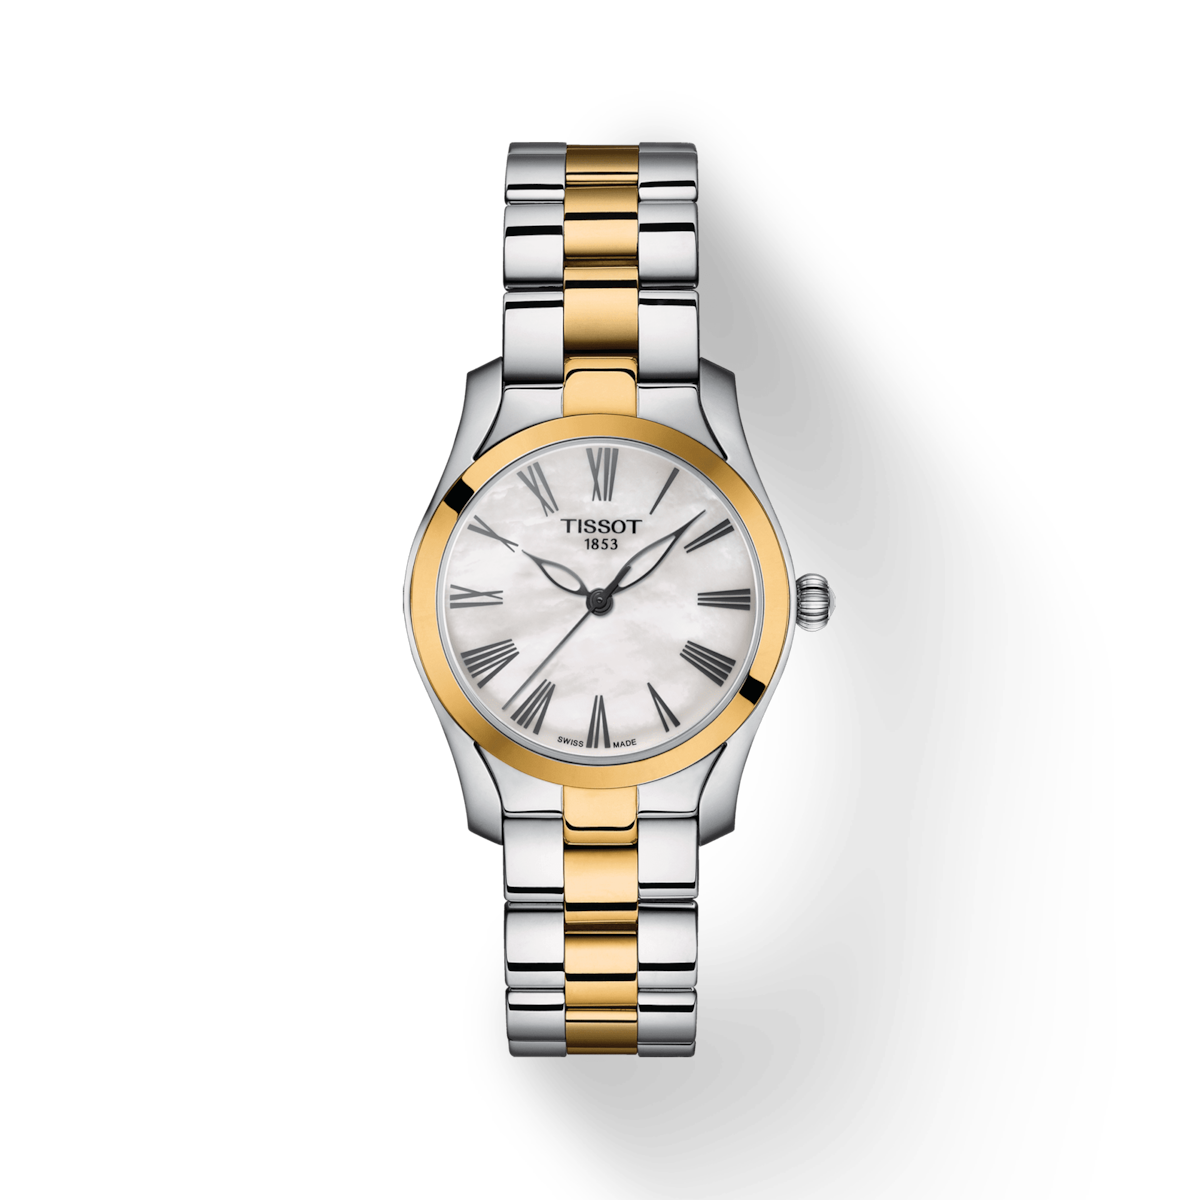 Tissot T-Lady White Mother-Of-Pearl Dial Women 30mm